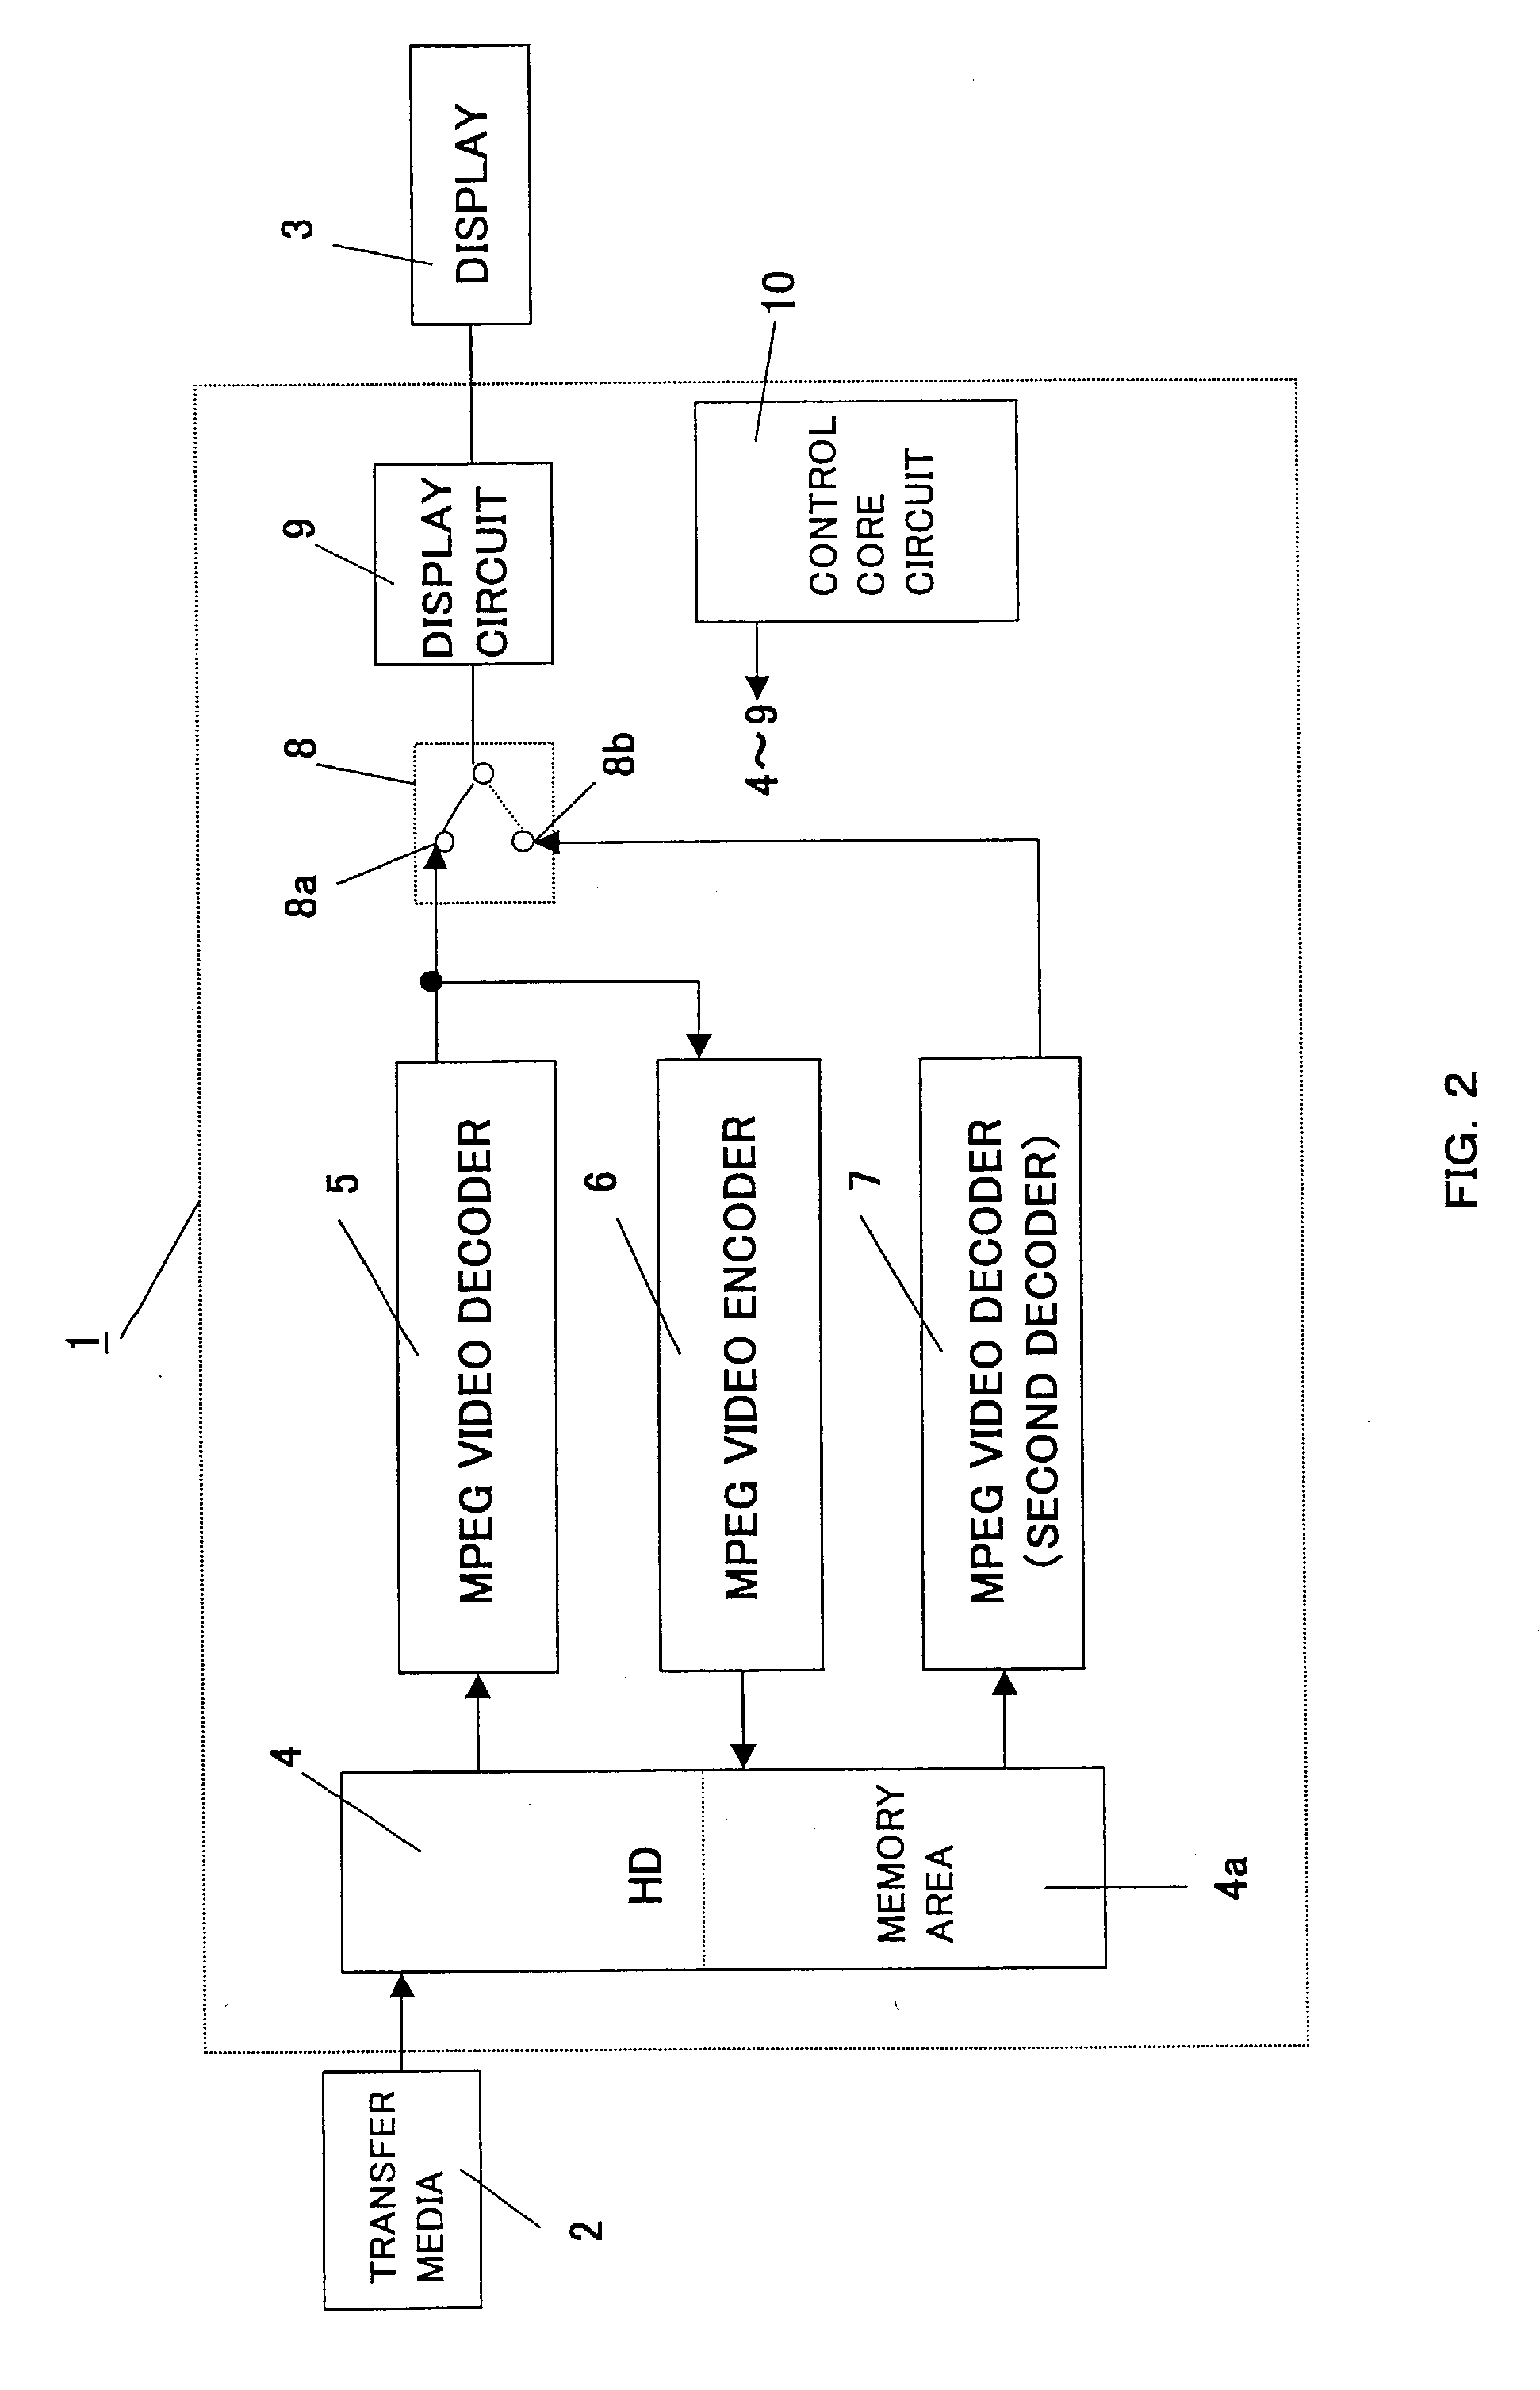 Image reproducing method, and image processing method, and image reproducing device, image processing device, and television receiver capable of using the methods